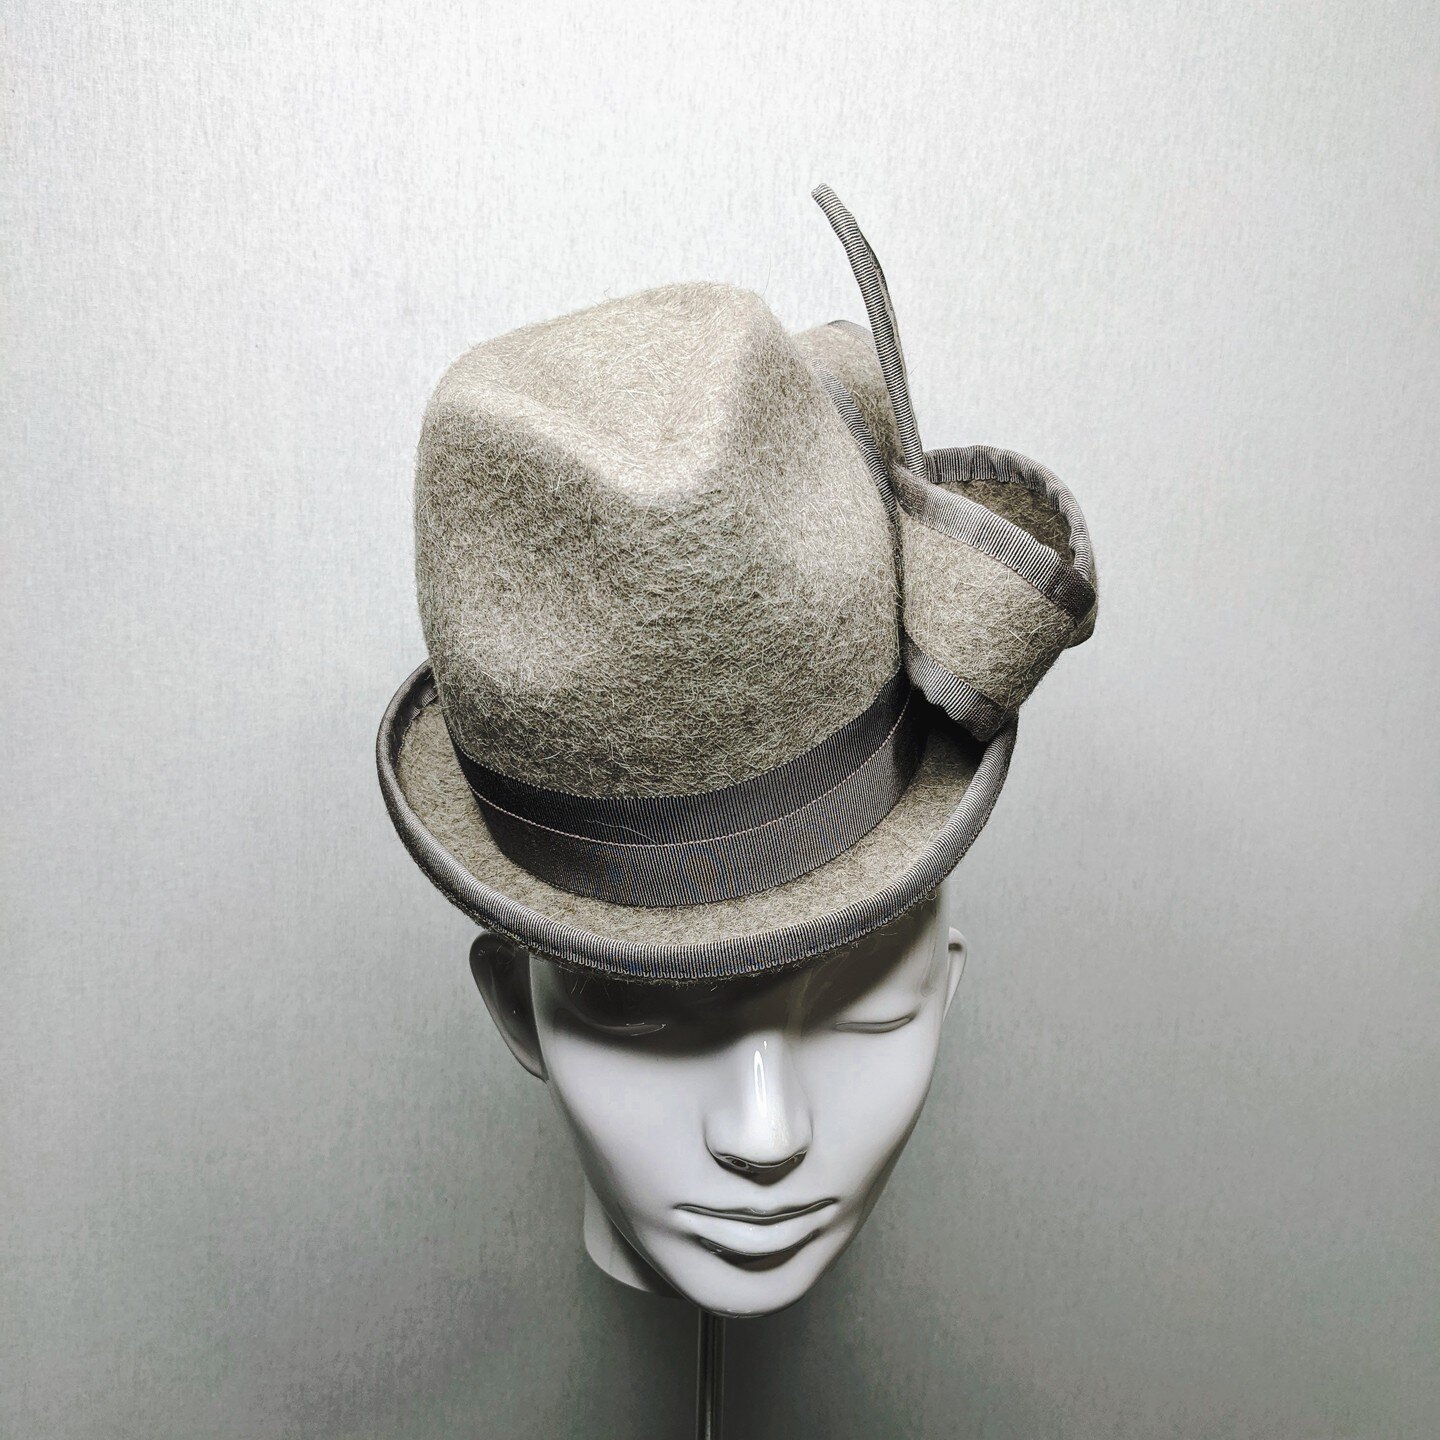 Meet Jessie, a 3/4 size Trilby with a turned up brim. The crown is also higher for a modern look, and wears like a fascinator. Its color is warm grey. Its material is wool angora. There is a special $100 discount for Jessie. Expires in a week. Use co